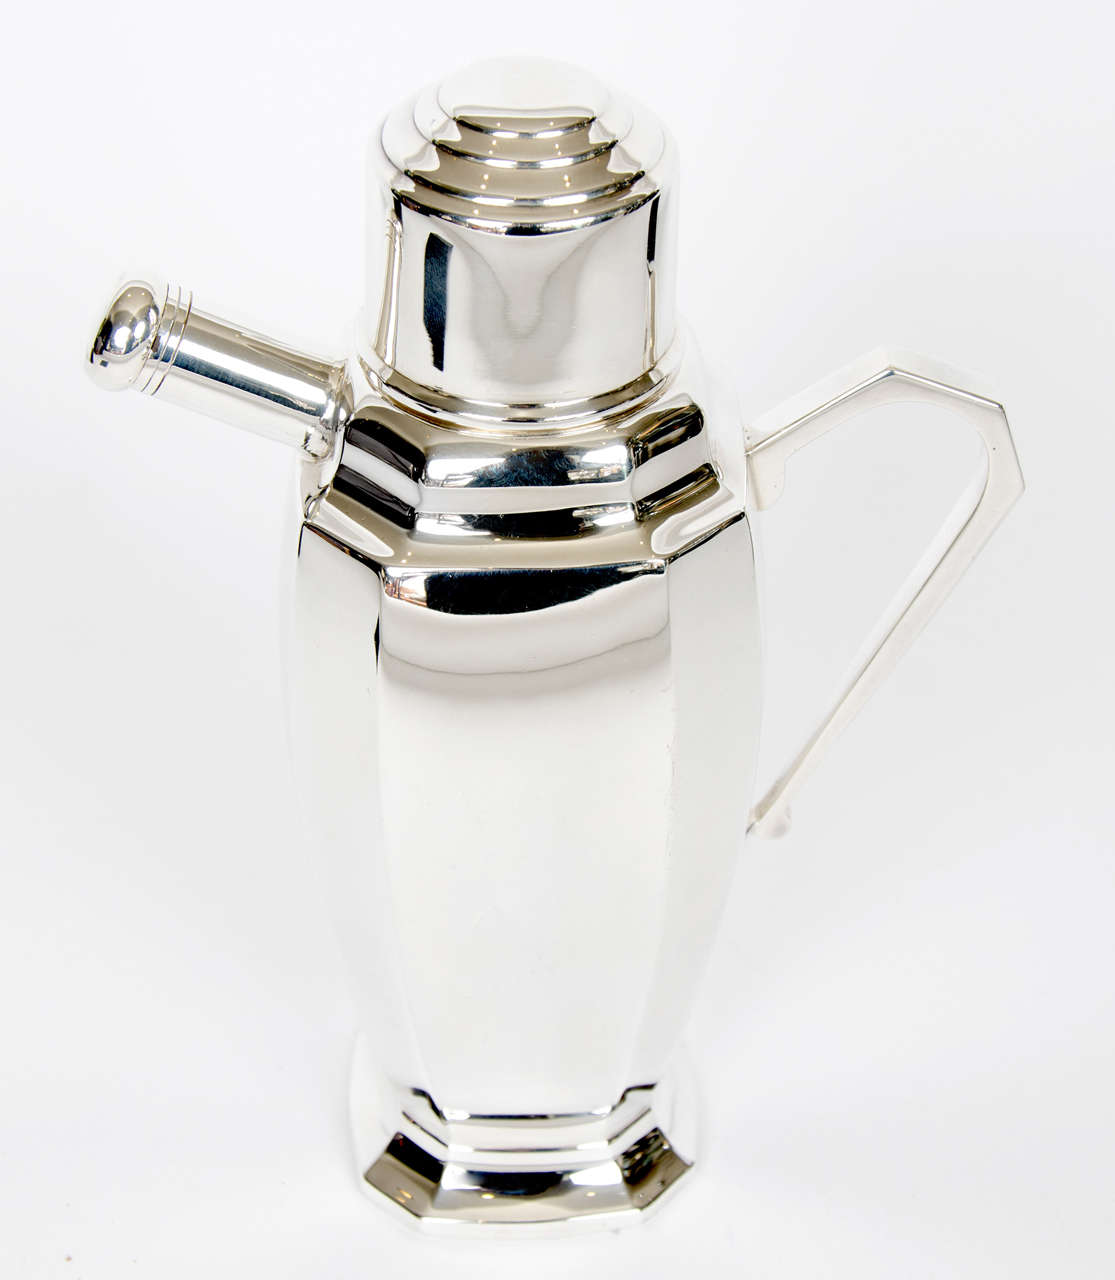 Silver plate cocktail Shaker, with a silver topped cork stopper on the spout.

Please enquire for shipping costs due to weight and size of the item.